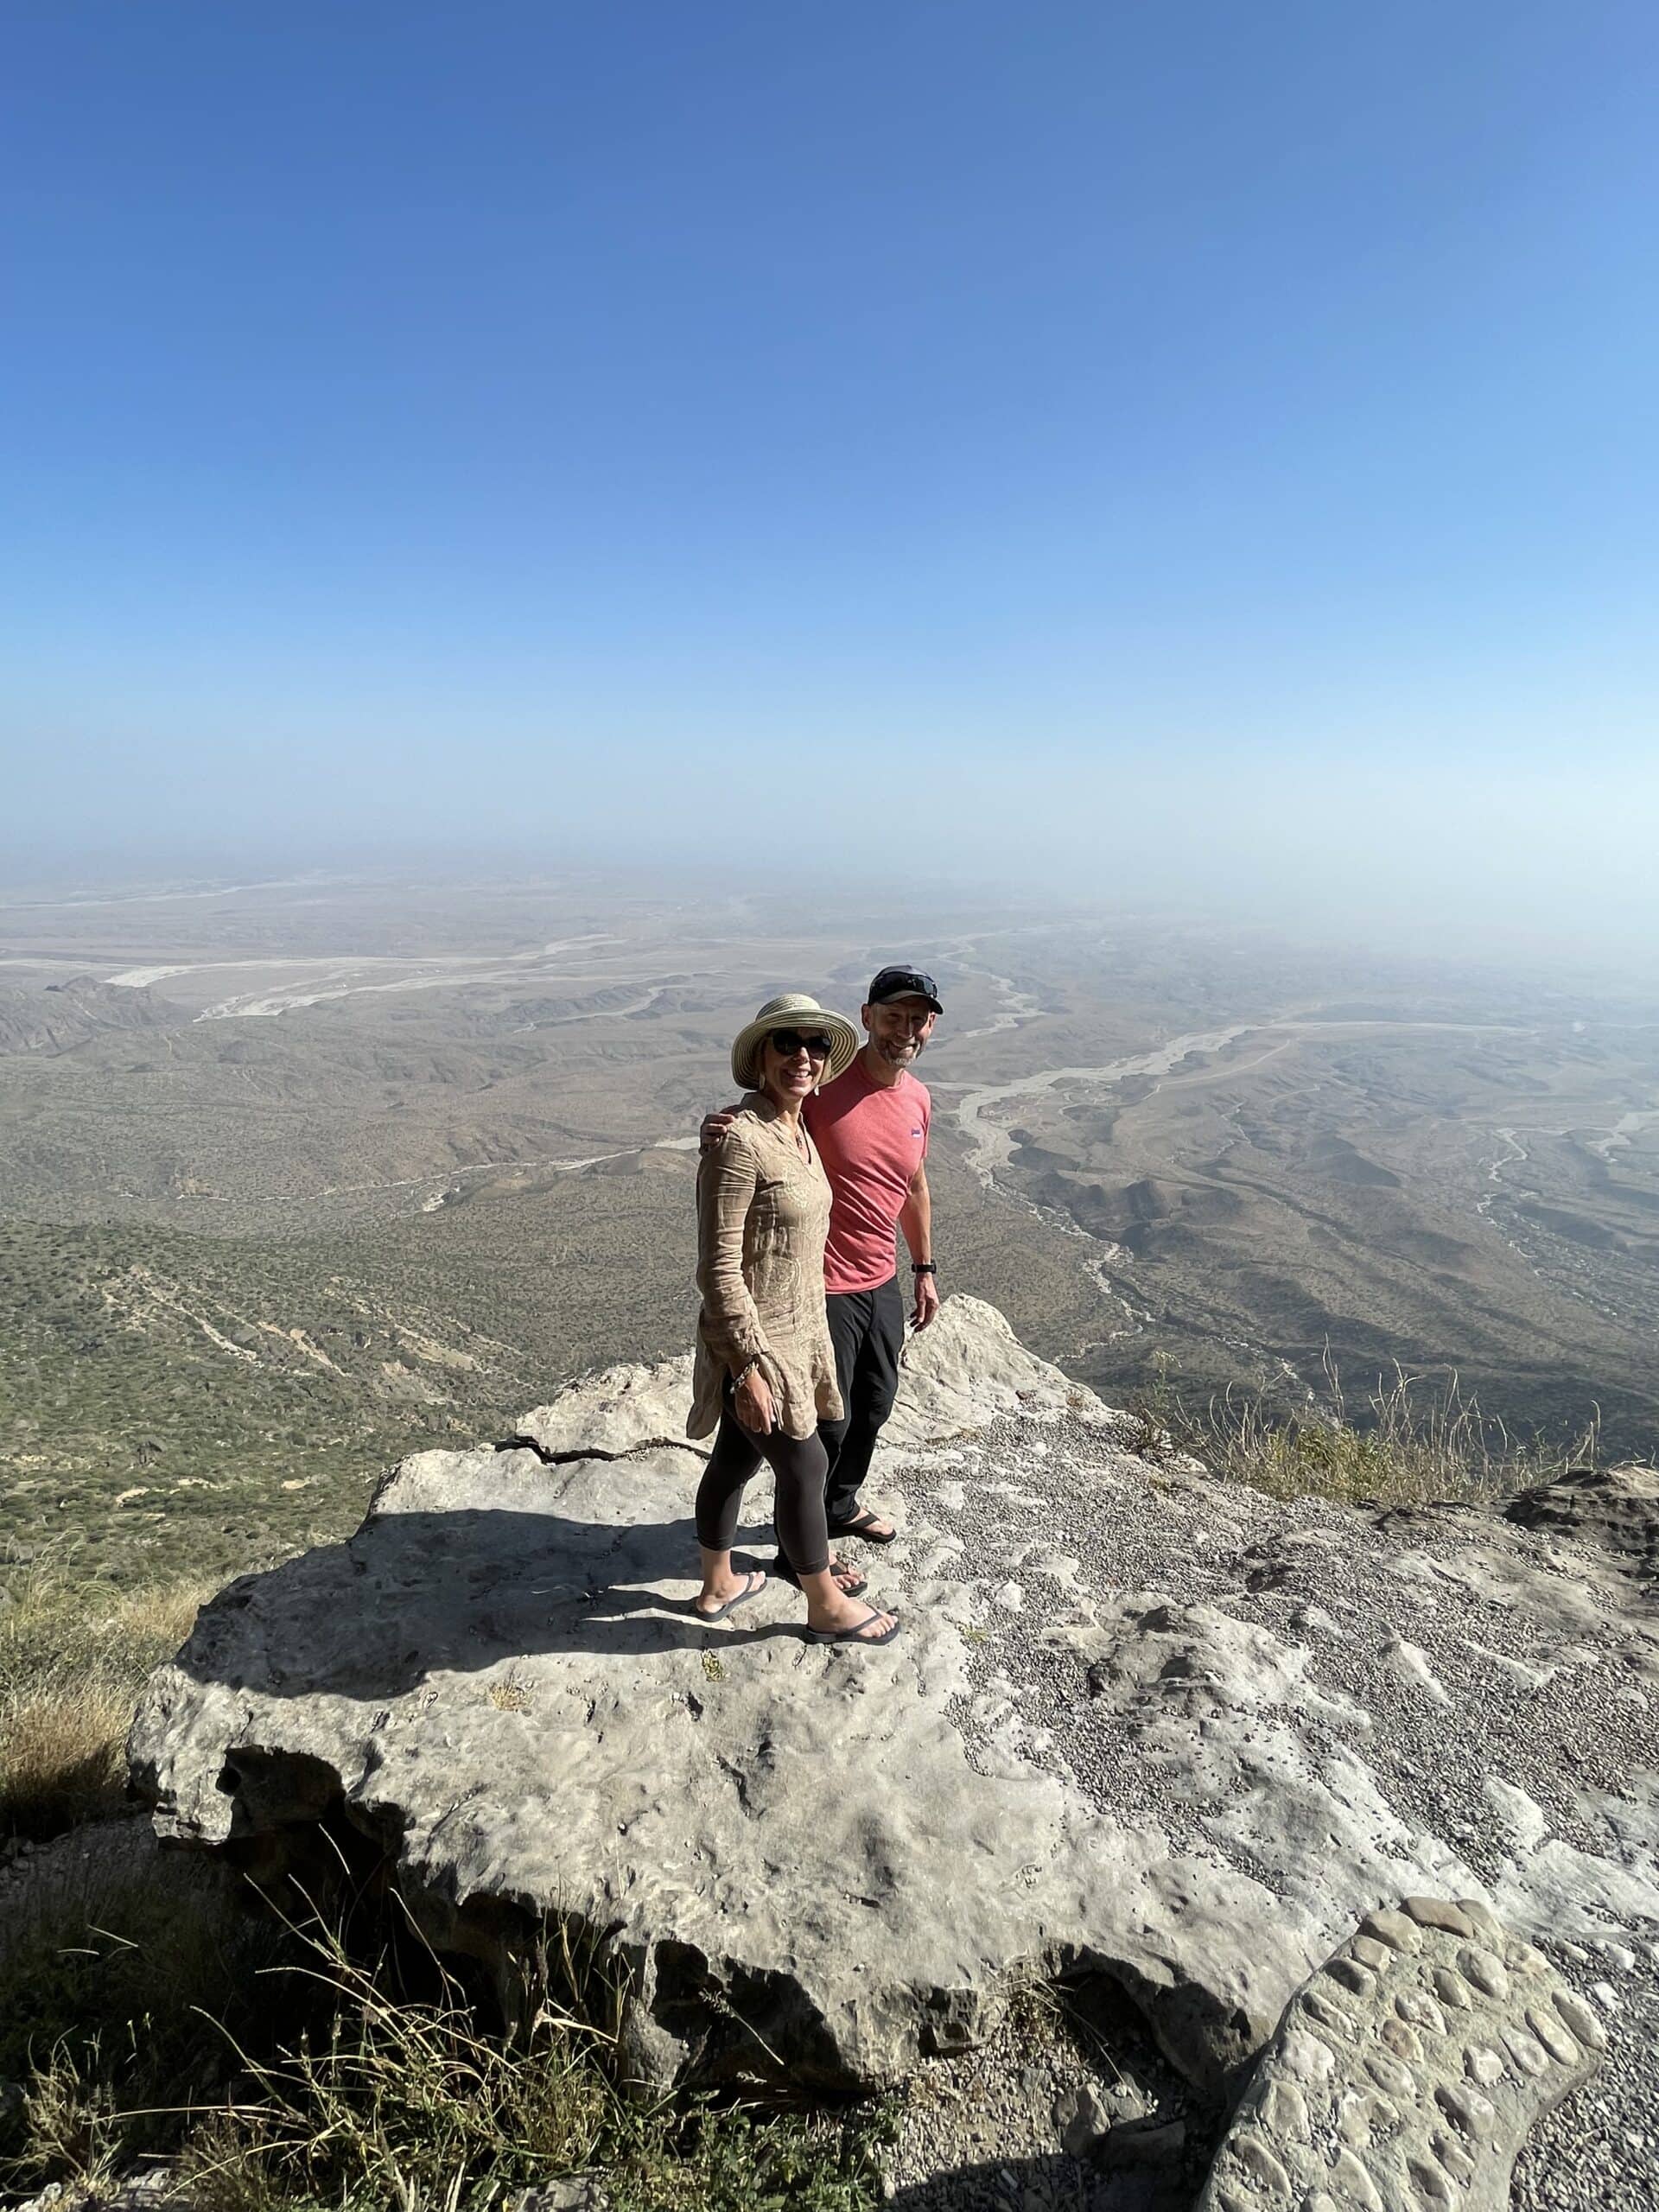 Travellers on a rock at 1700m above sea level in Oman with blue sky in the background